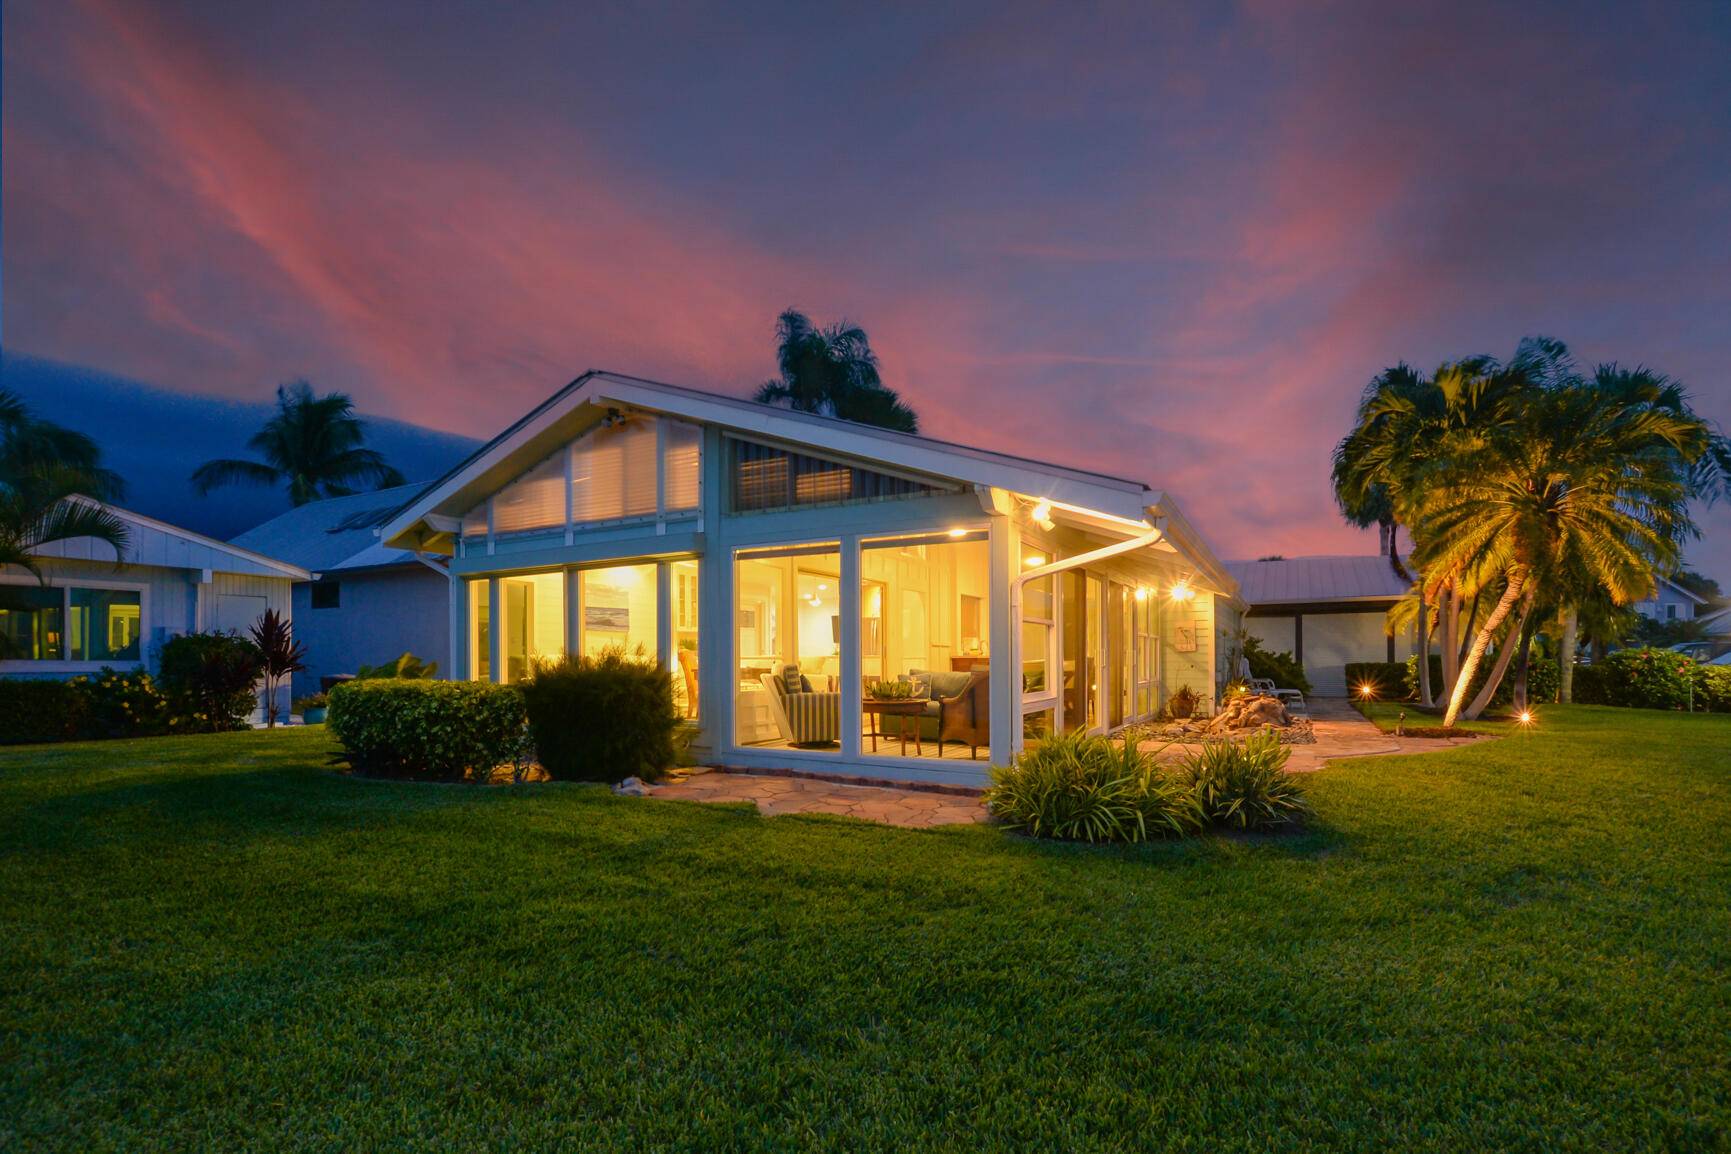 This stunning home comes with spectacular wide water views of the Indian River.